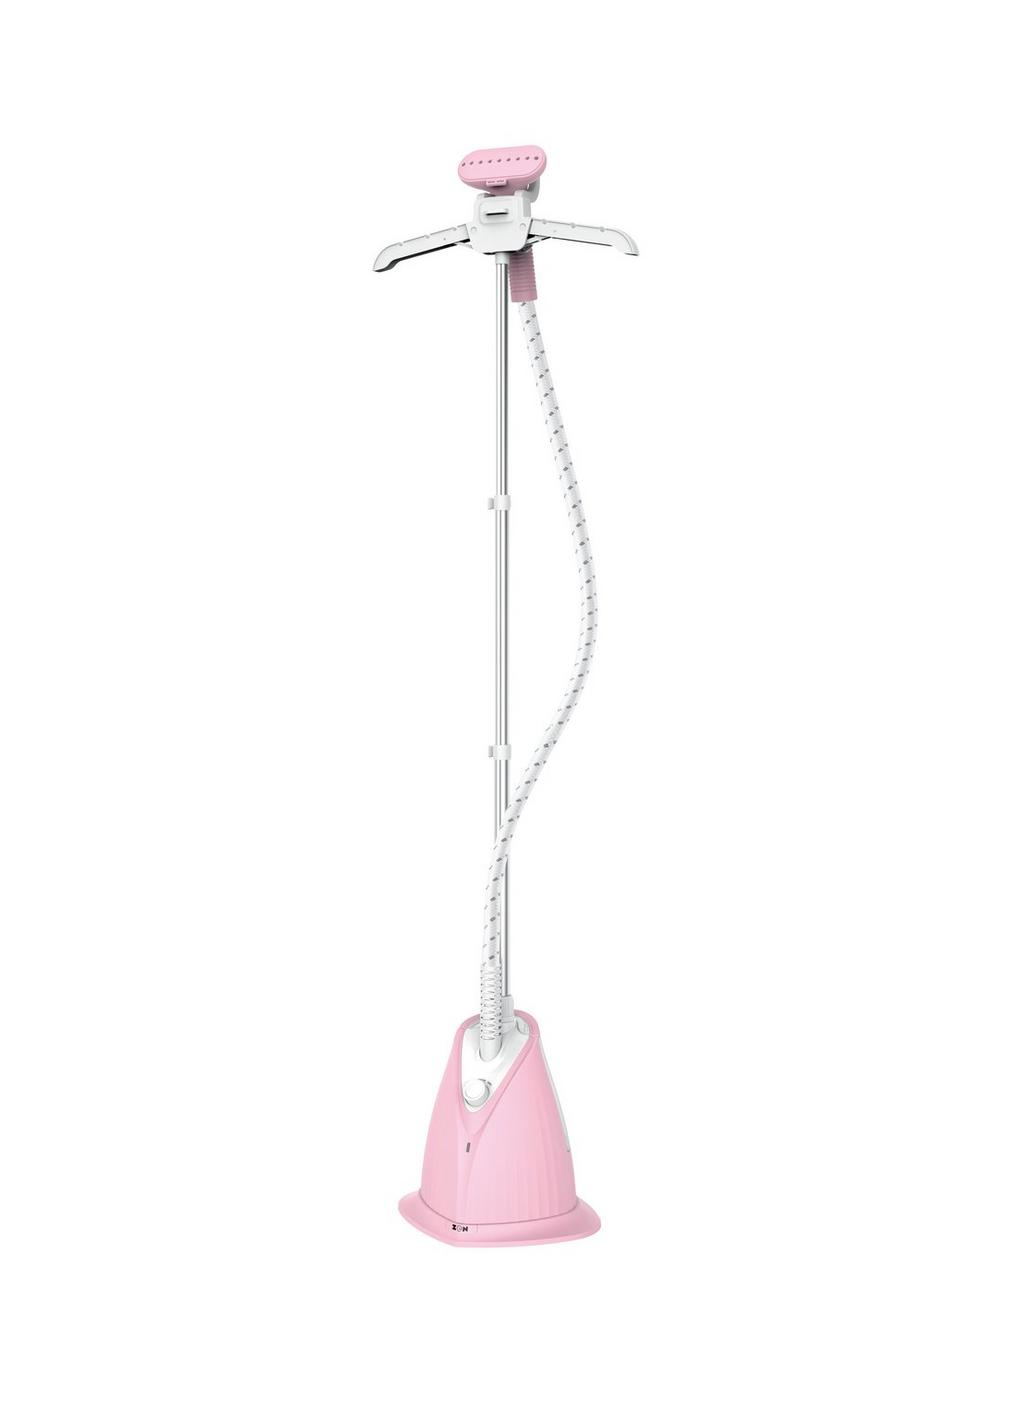 Zen Garment Steamer With Single Pole 1800W 1.7L Pink | reliable performance | lightweight | variable steam settings | safety features | stylish | even heat distribution | Halabh.com